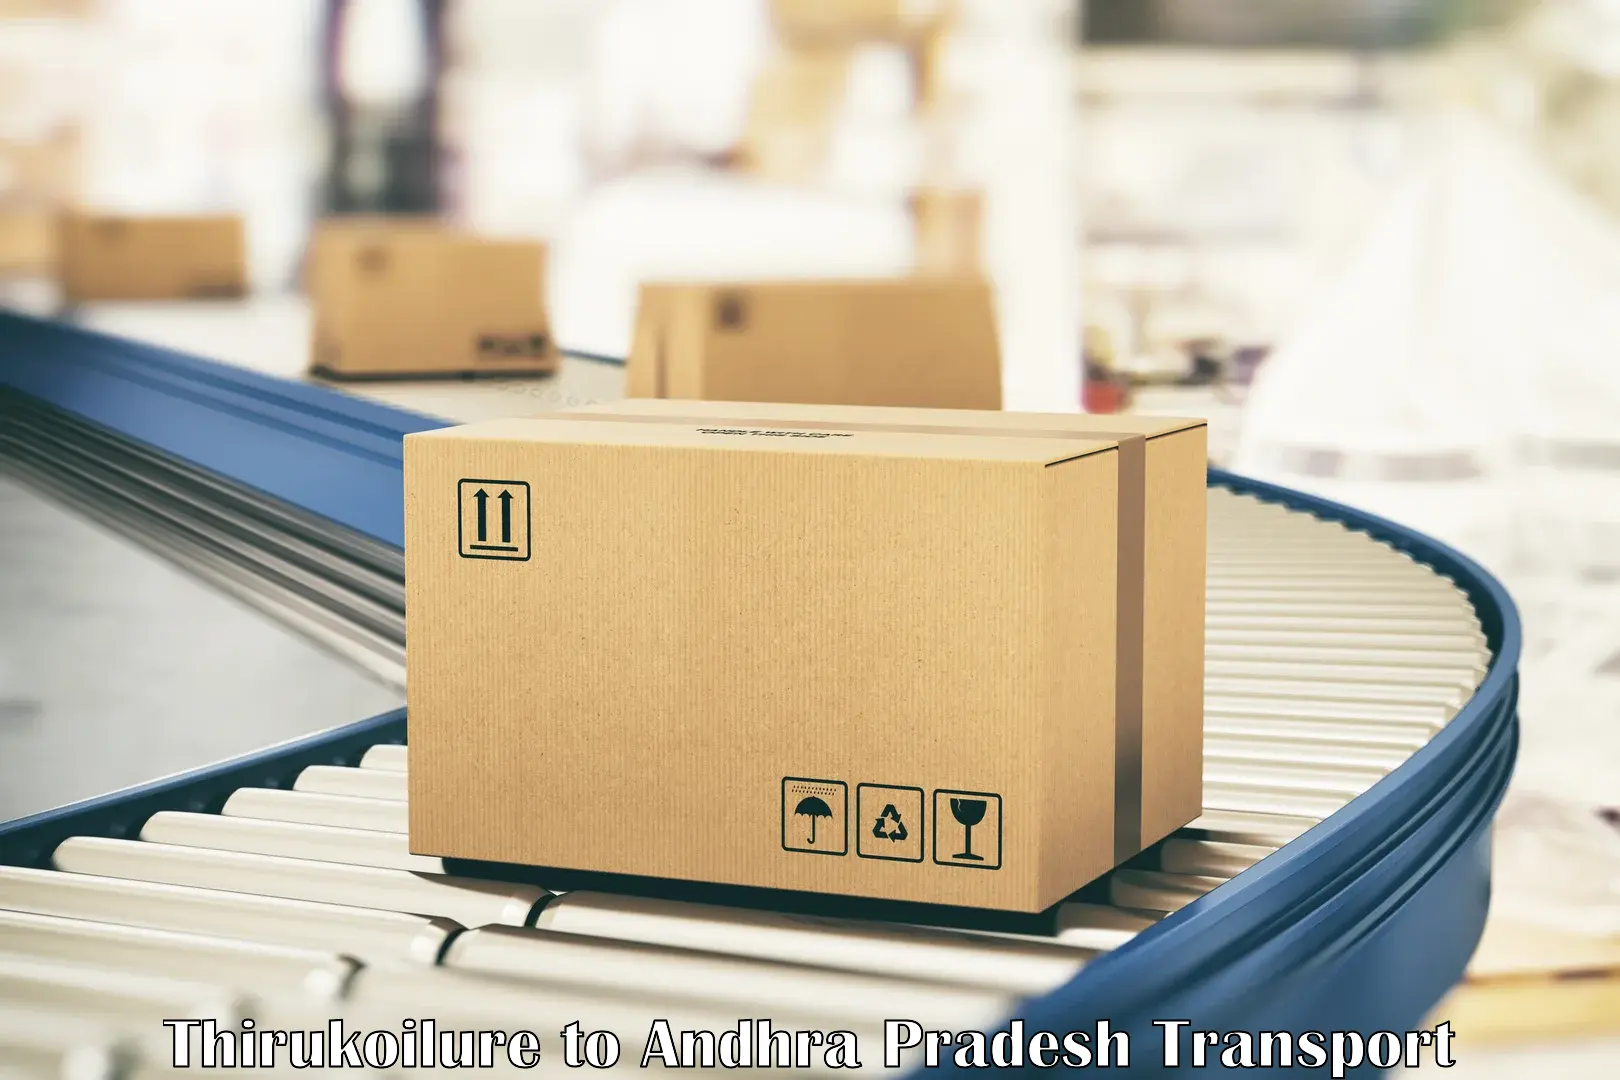 Parcel transport services in Thirukoilure to Changaroth